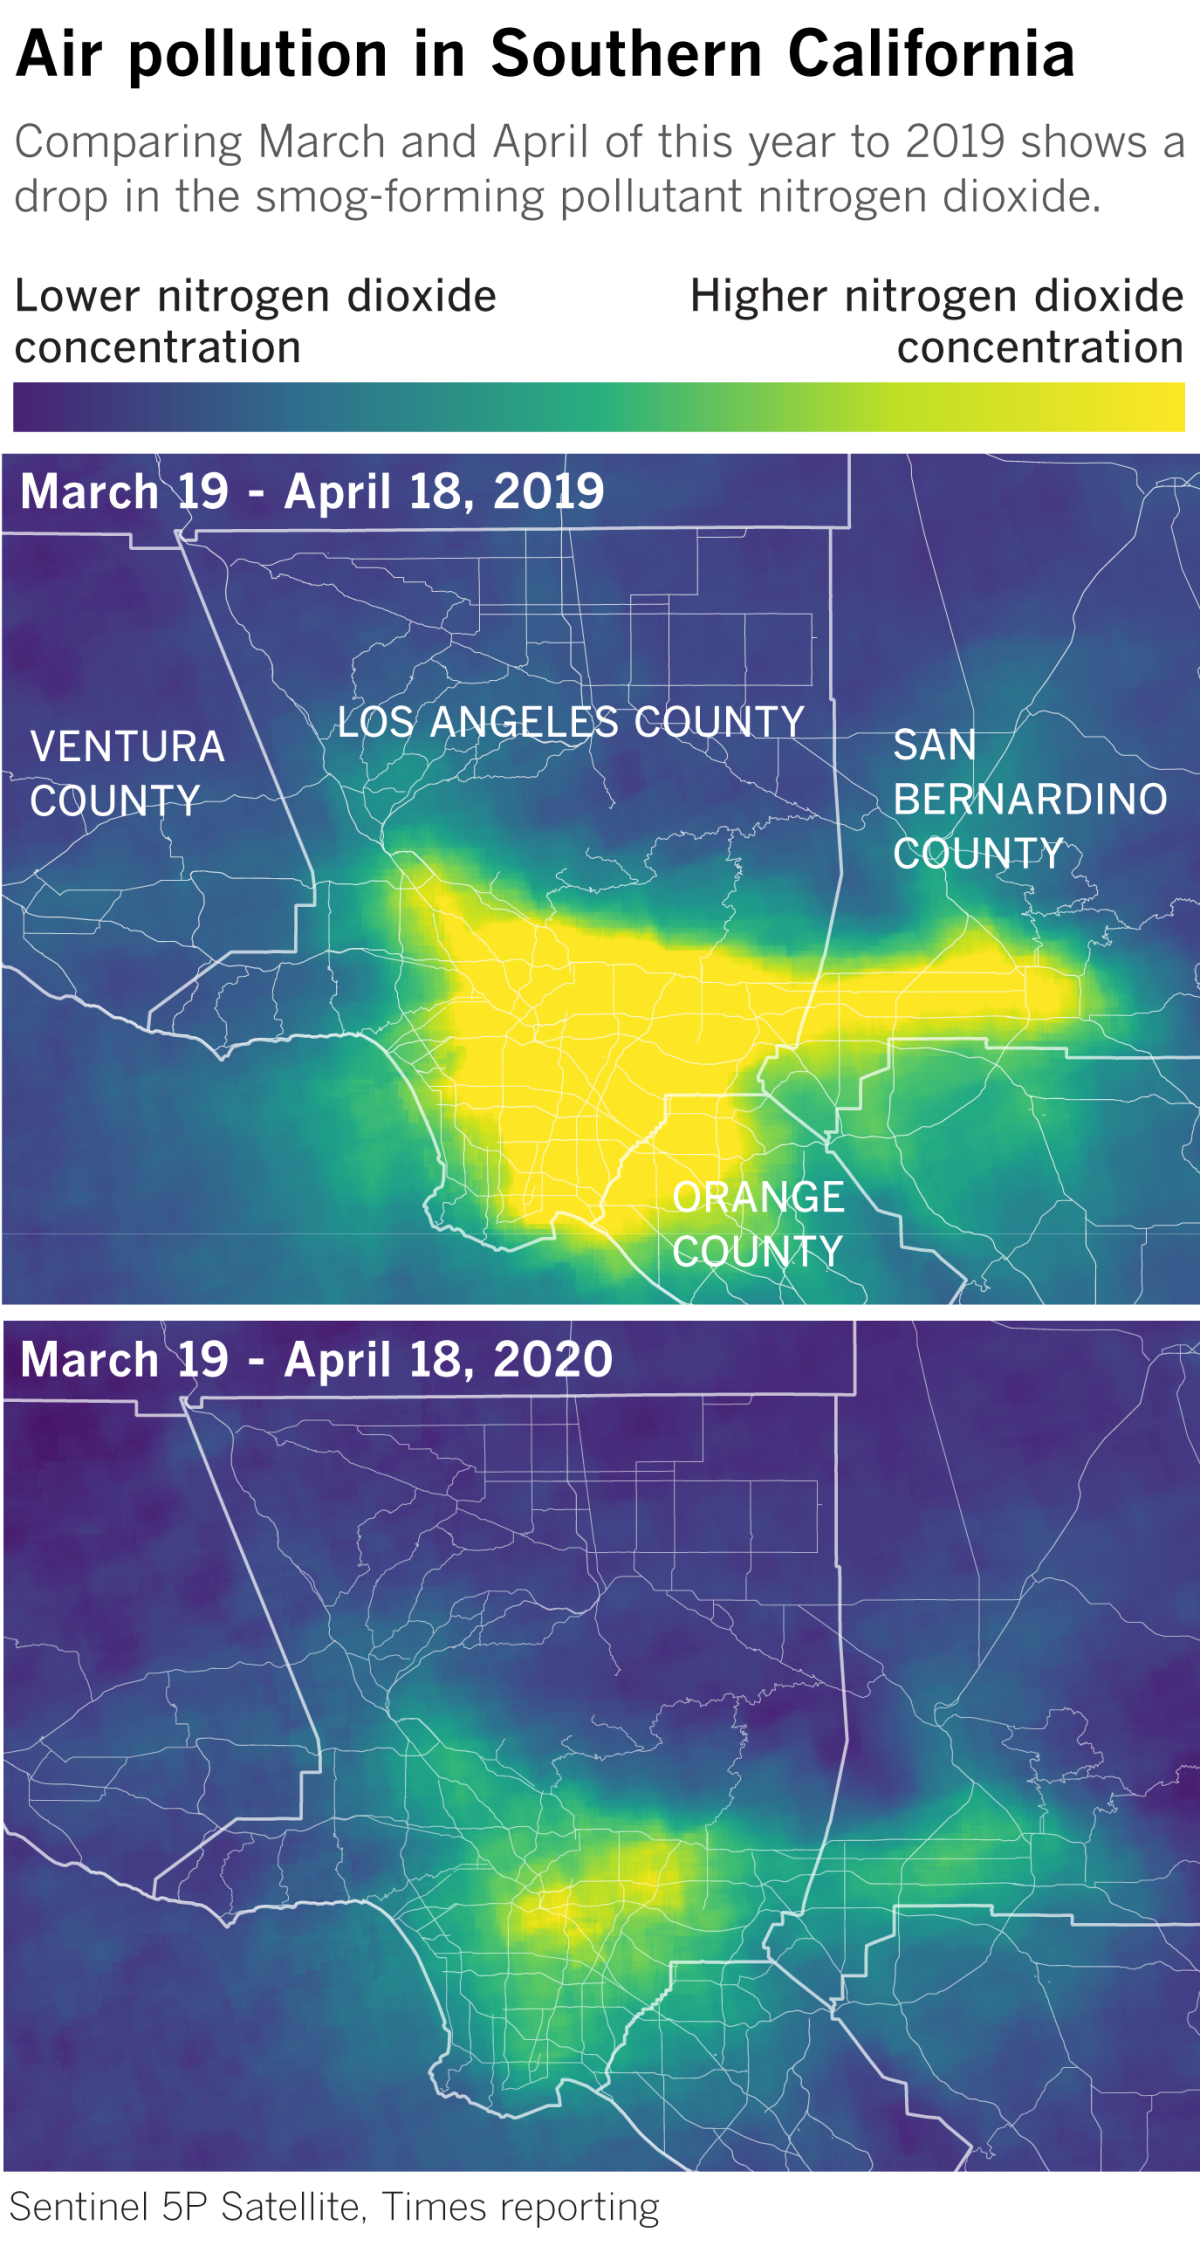 Air pollution in Southern California